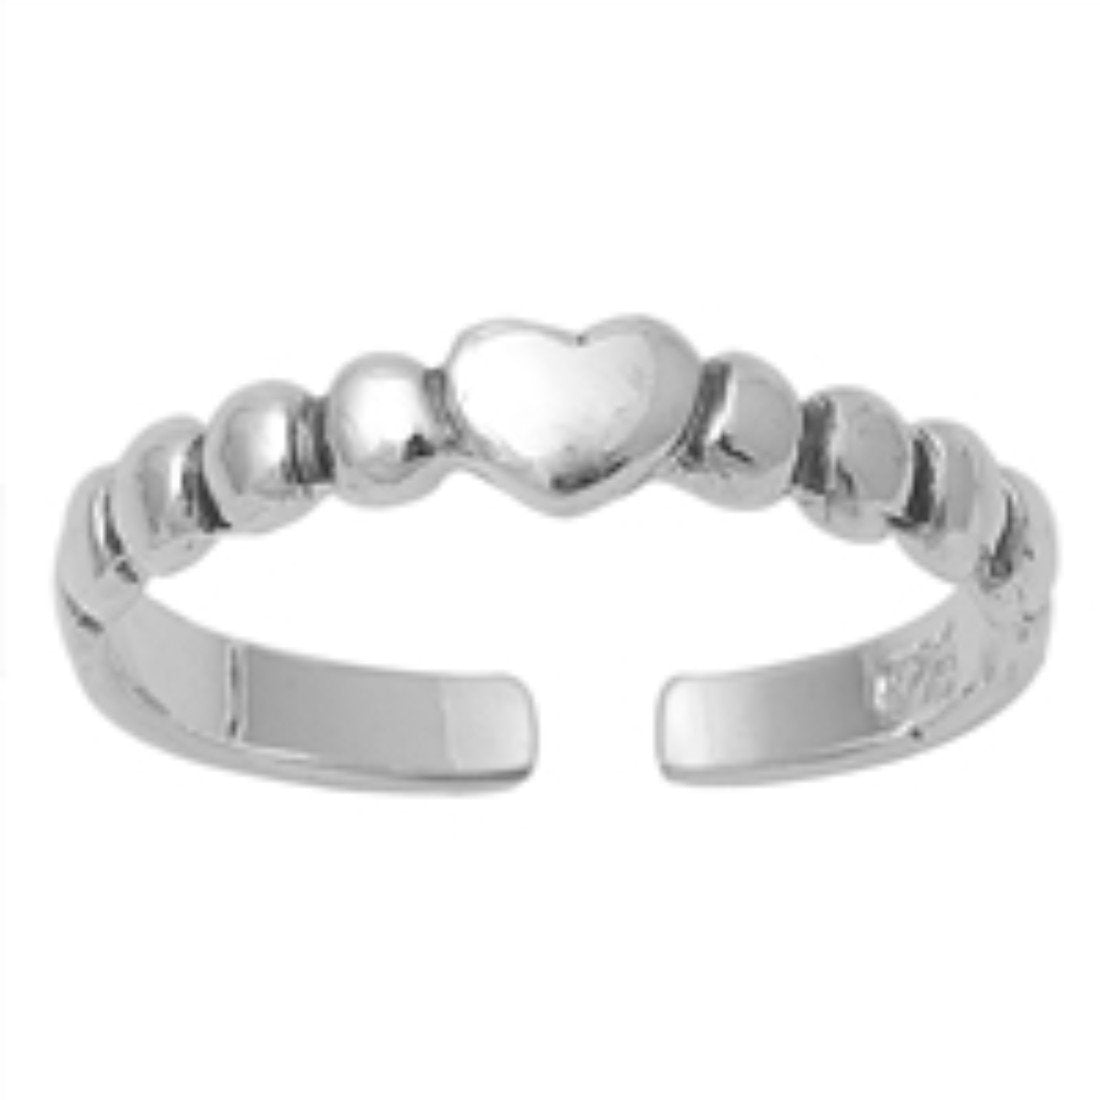 Adjustable Heart Toe Ring Band 925 Sterling Silver (3mm)